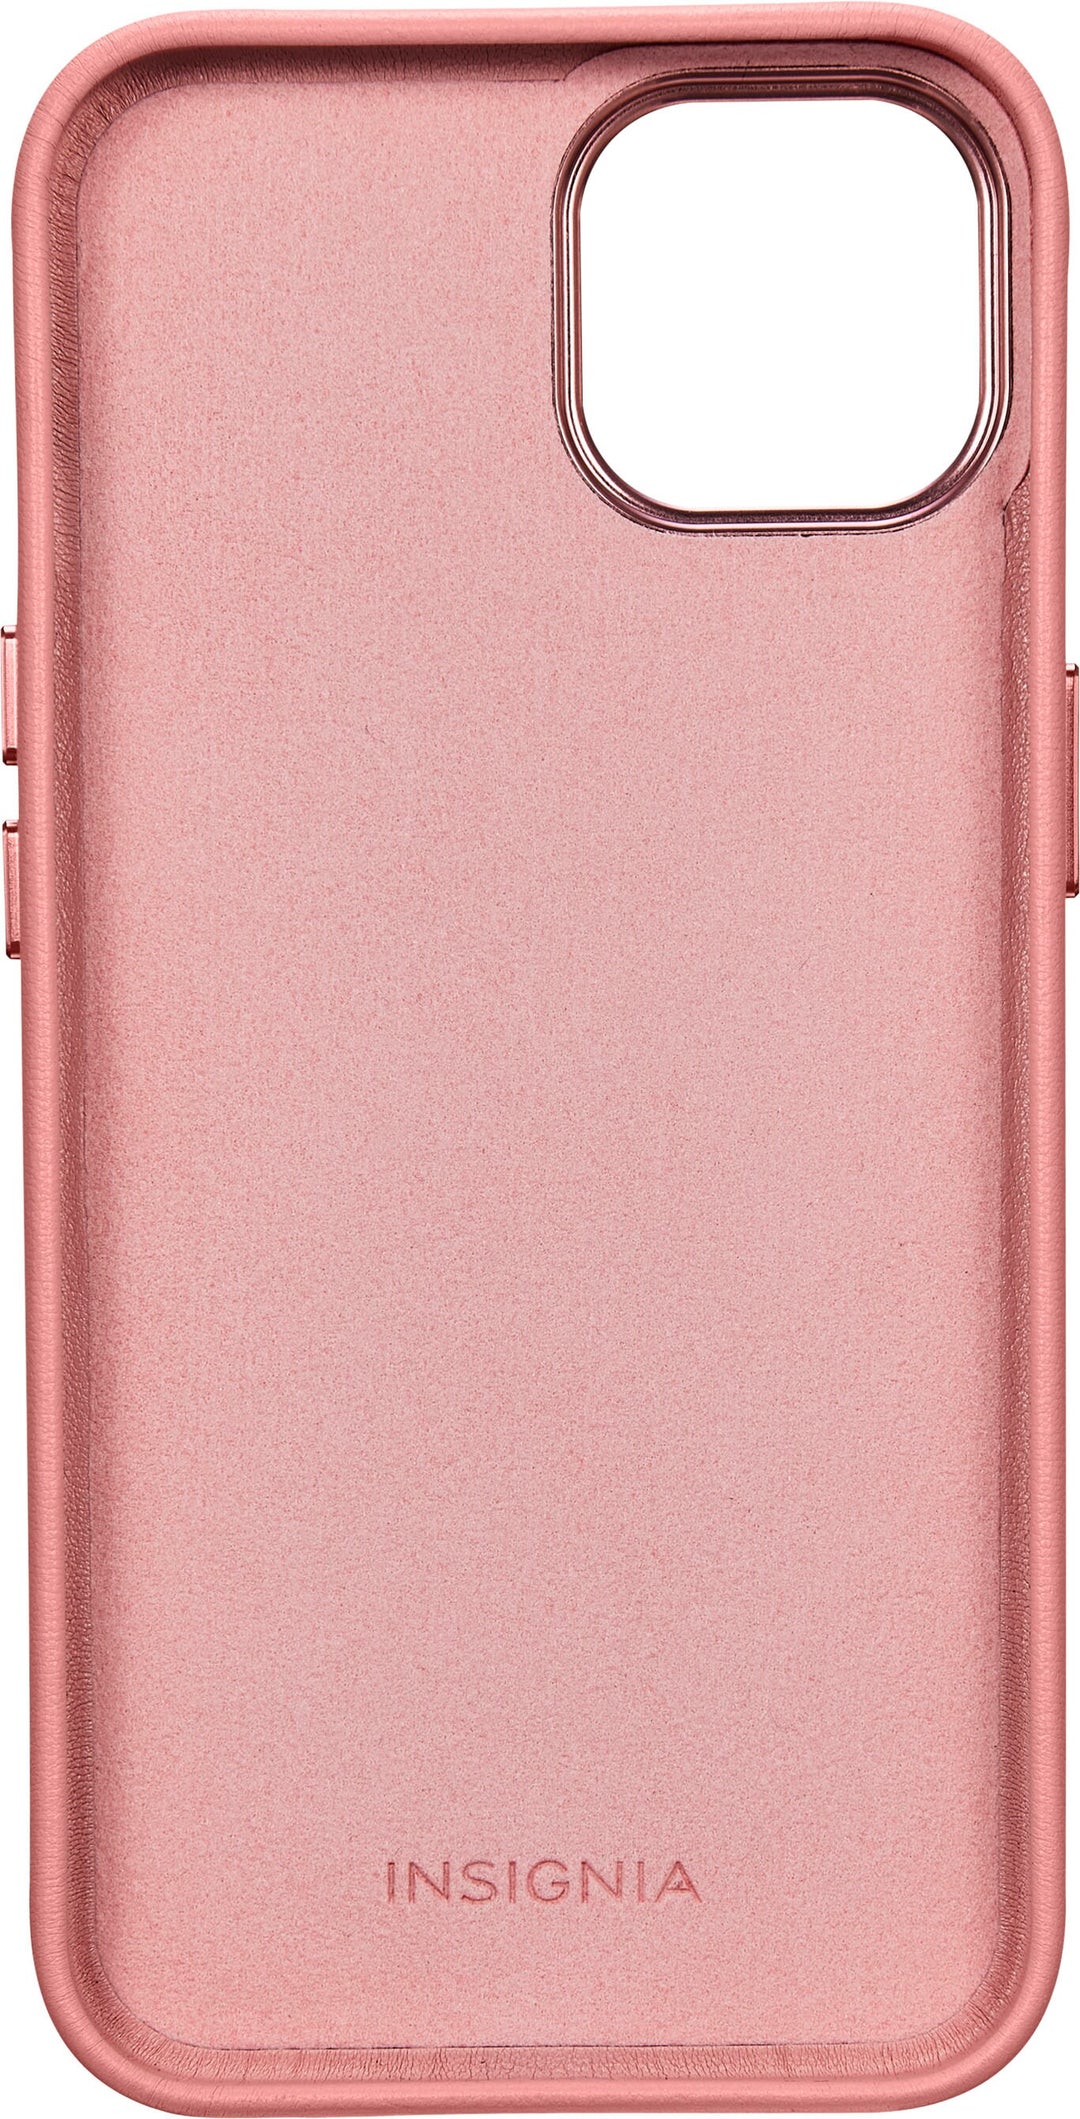 Insignia™ - Leather Wallet Case for iPhone 14 and iPhone 13 - Pink_4